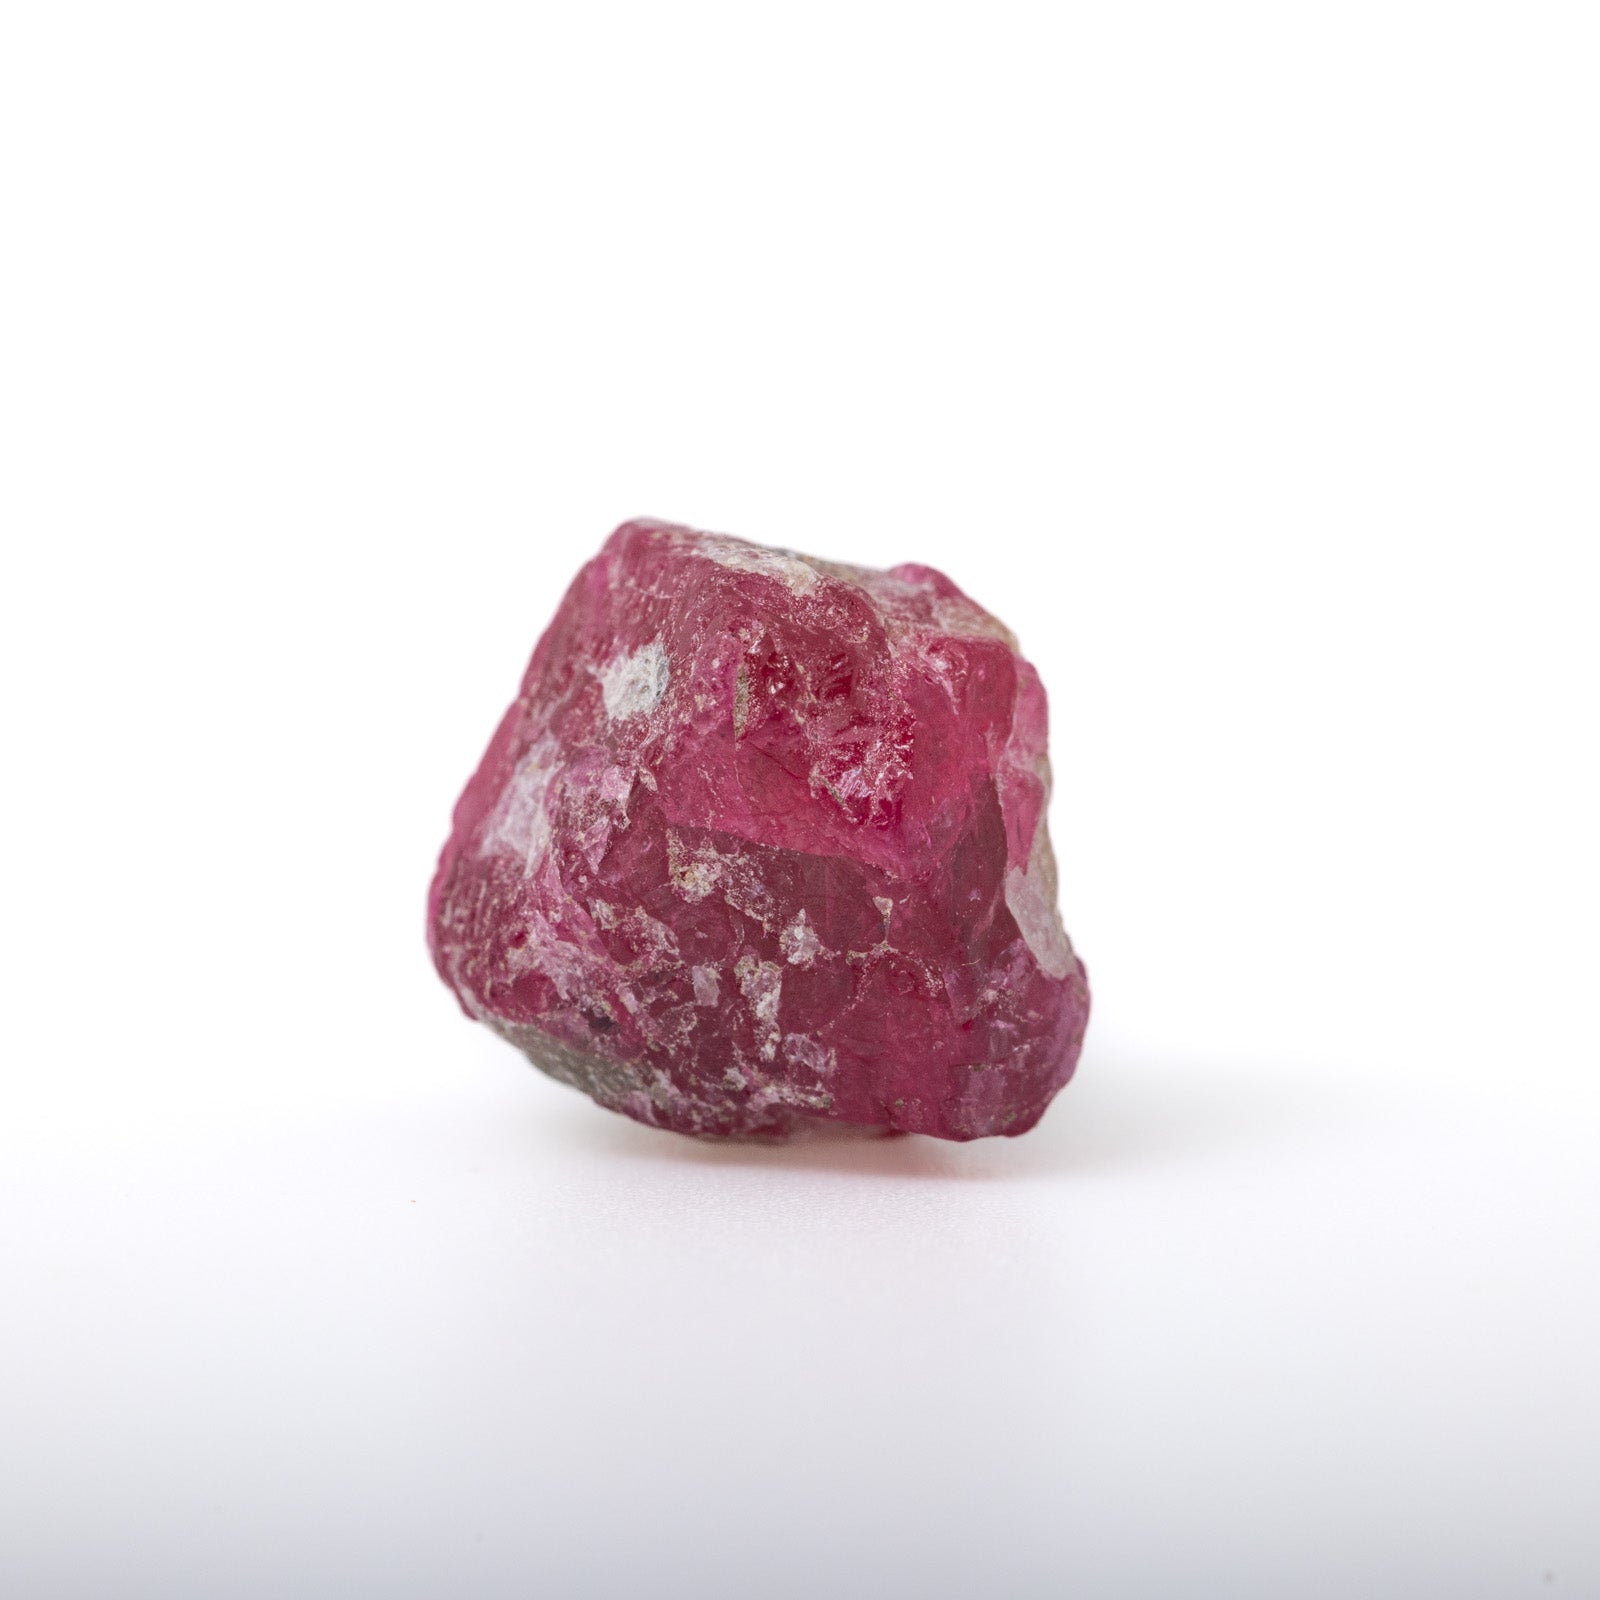 Spinel crystal in various sizes, perfect for stimulating creativity and unlocking new perspectives.